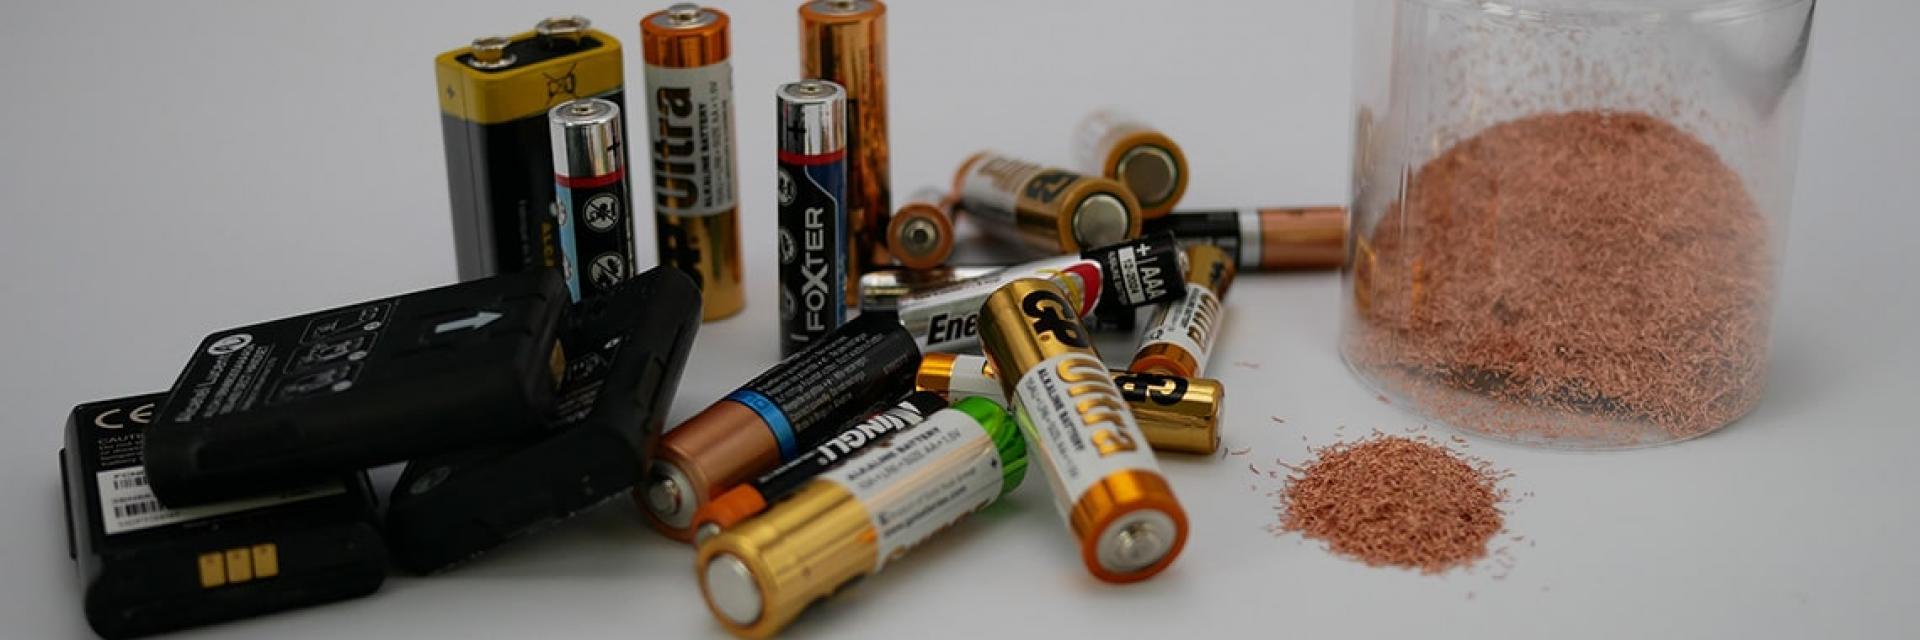 Everything you need to know about handling battery powders and components